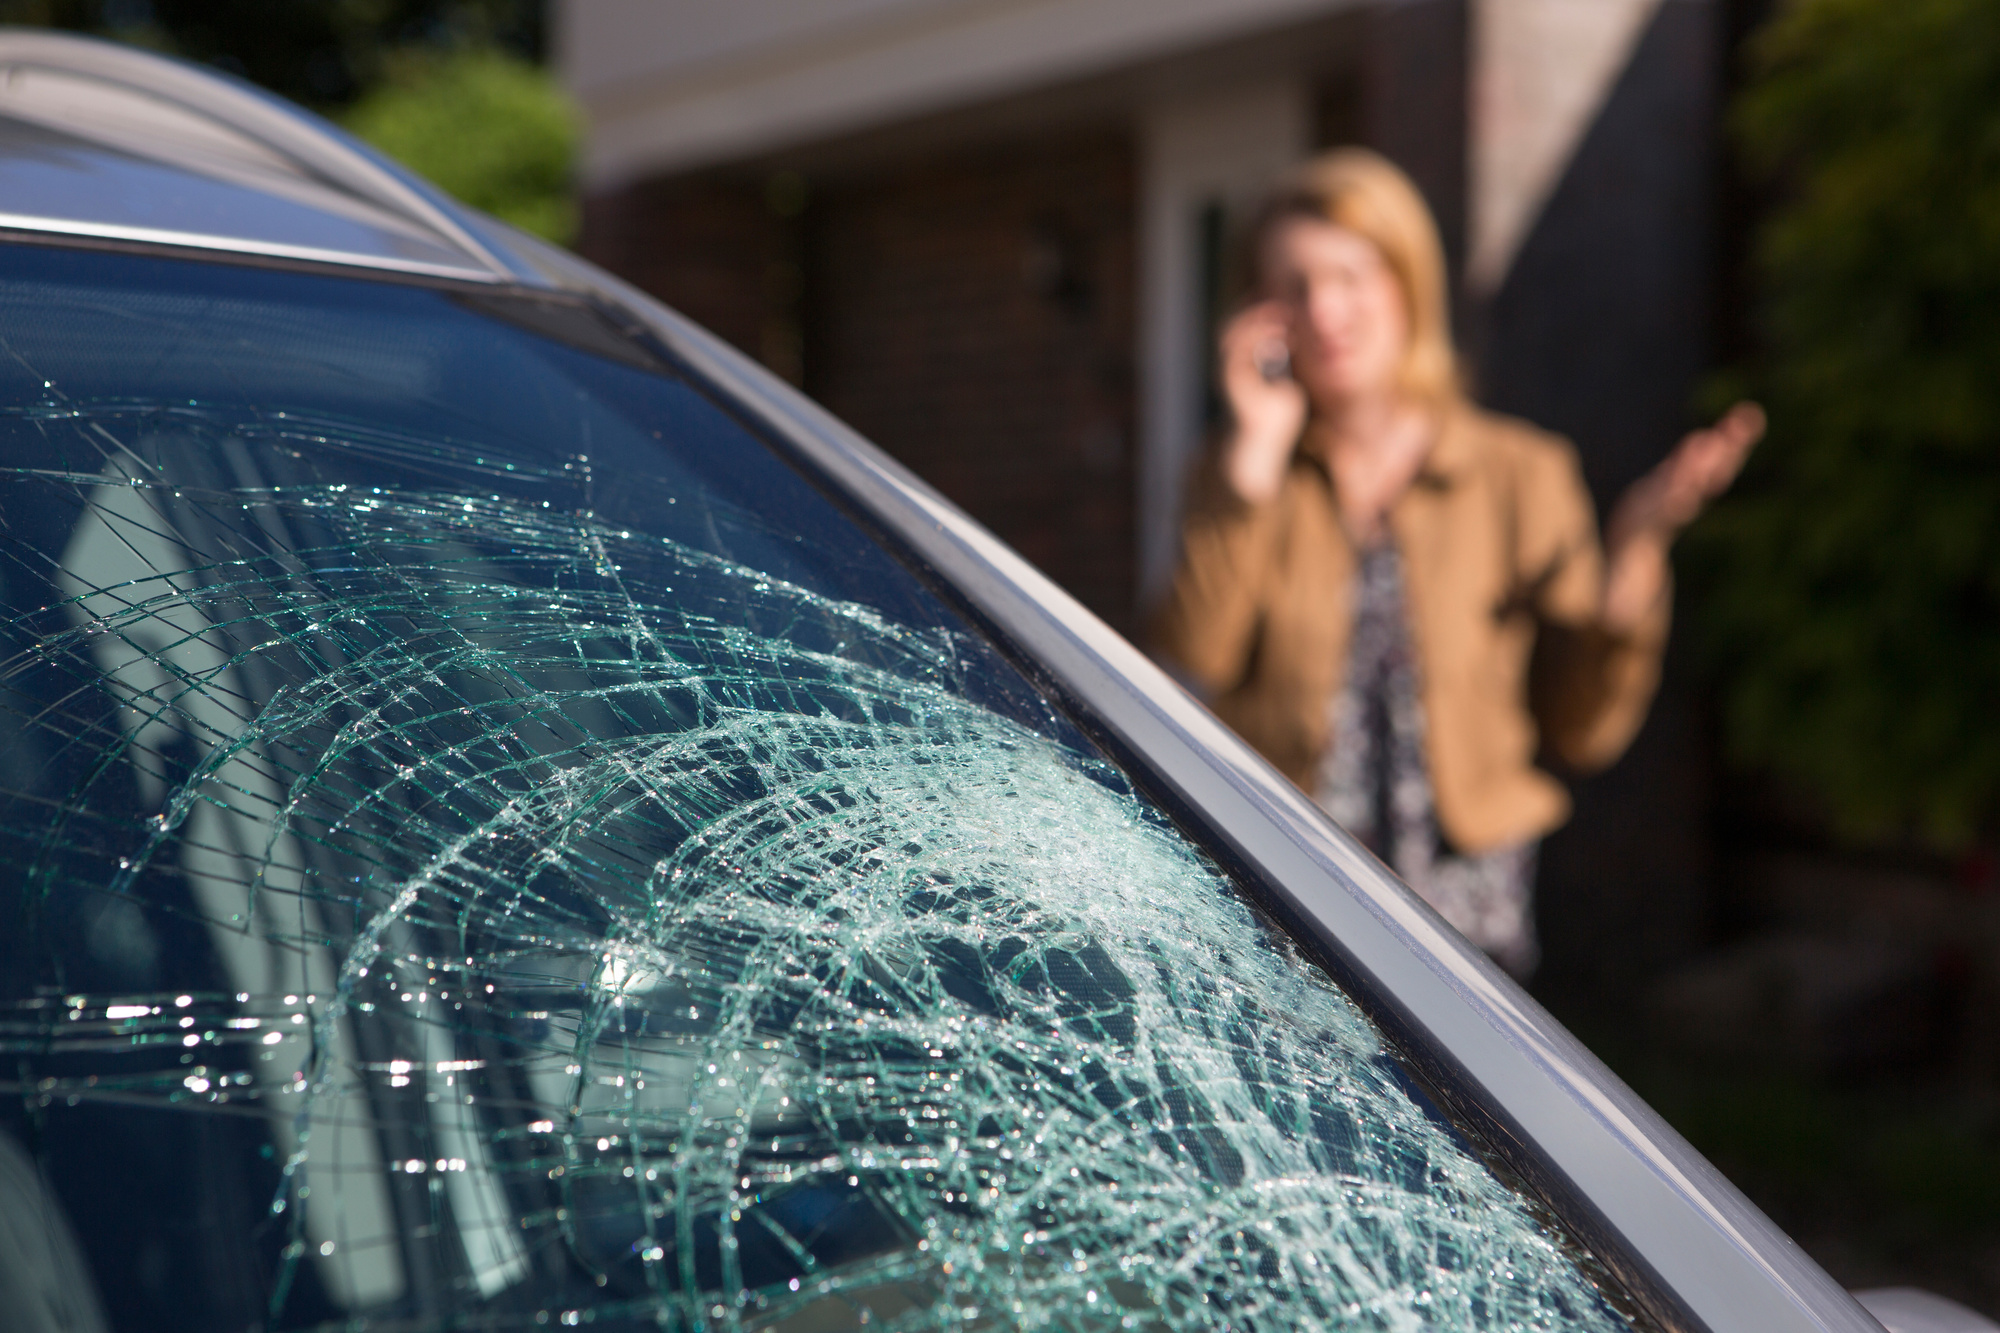 Cracked Windshield vs Replacement: Which Do You Need?